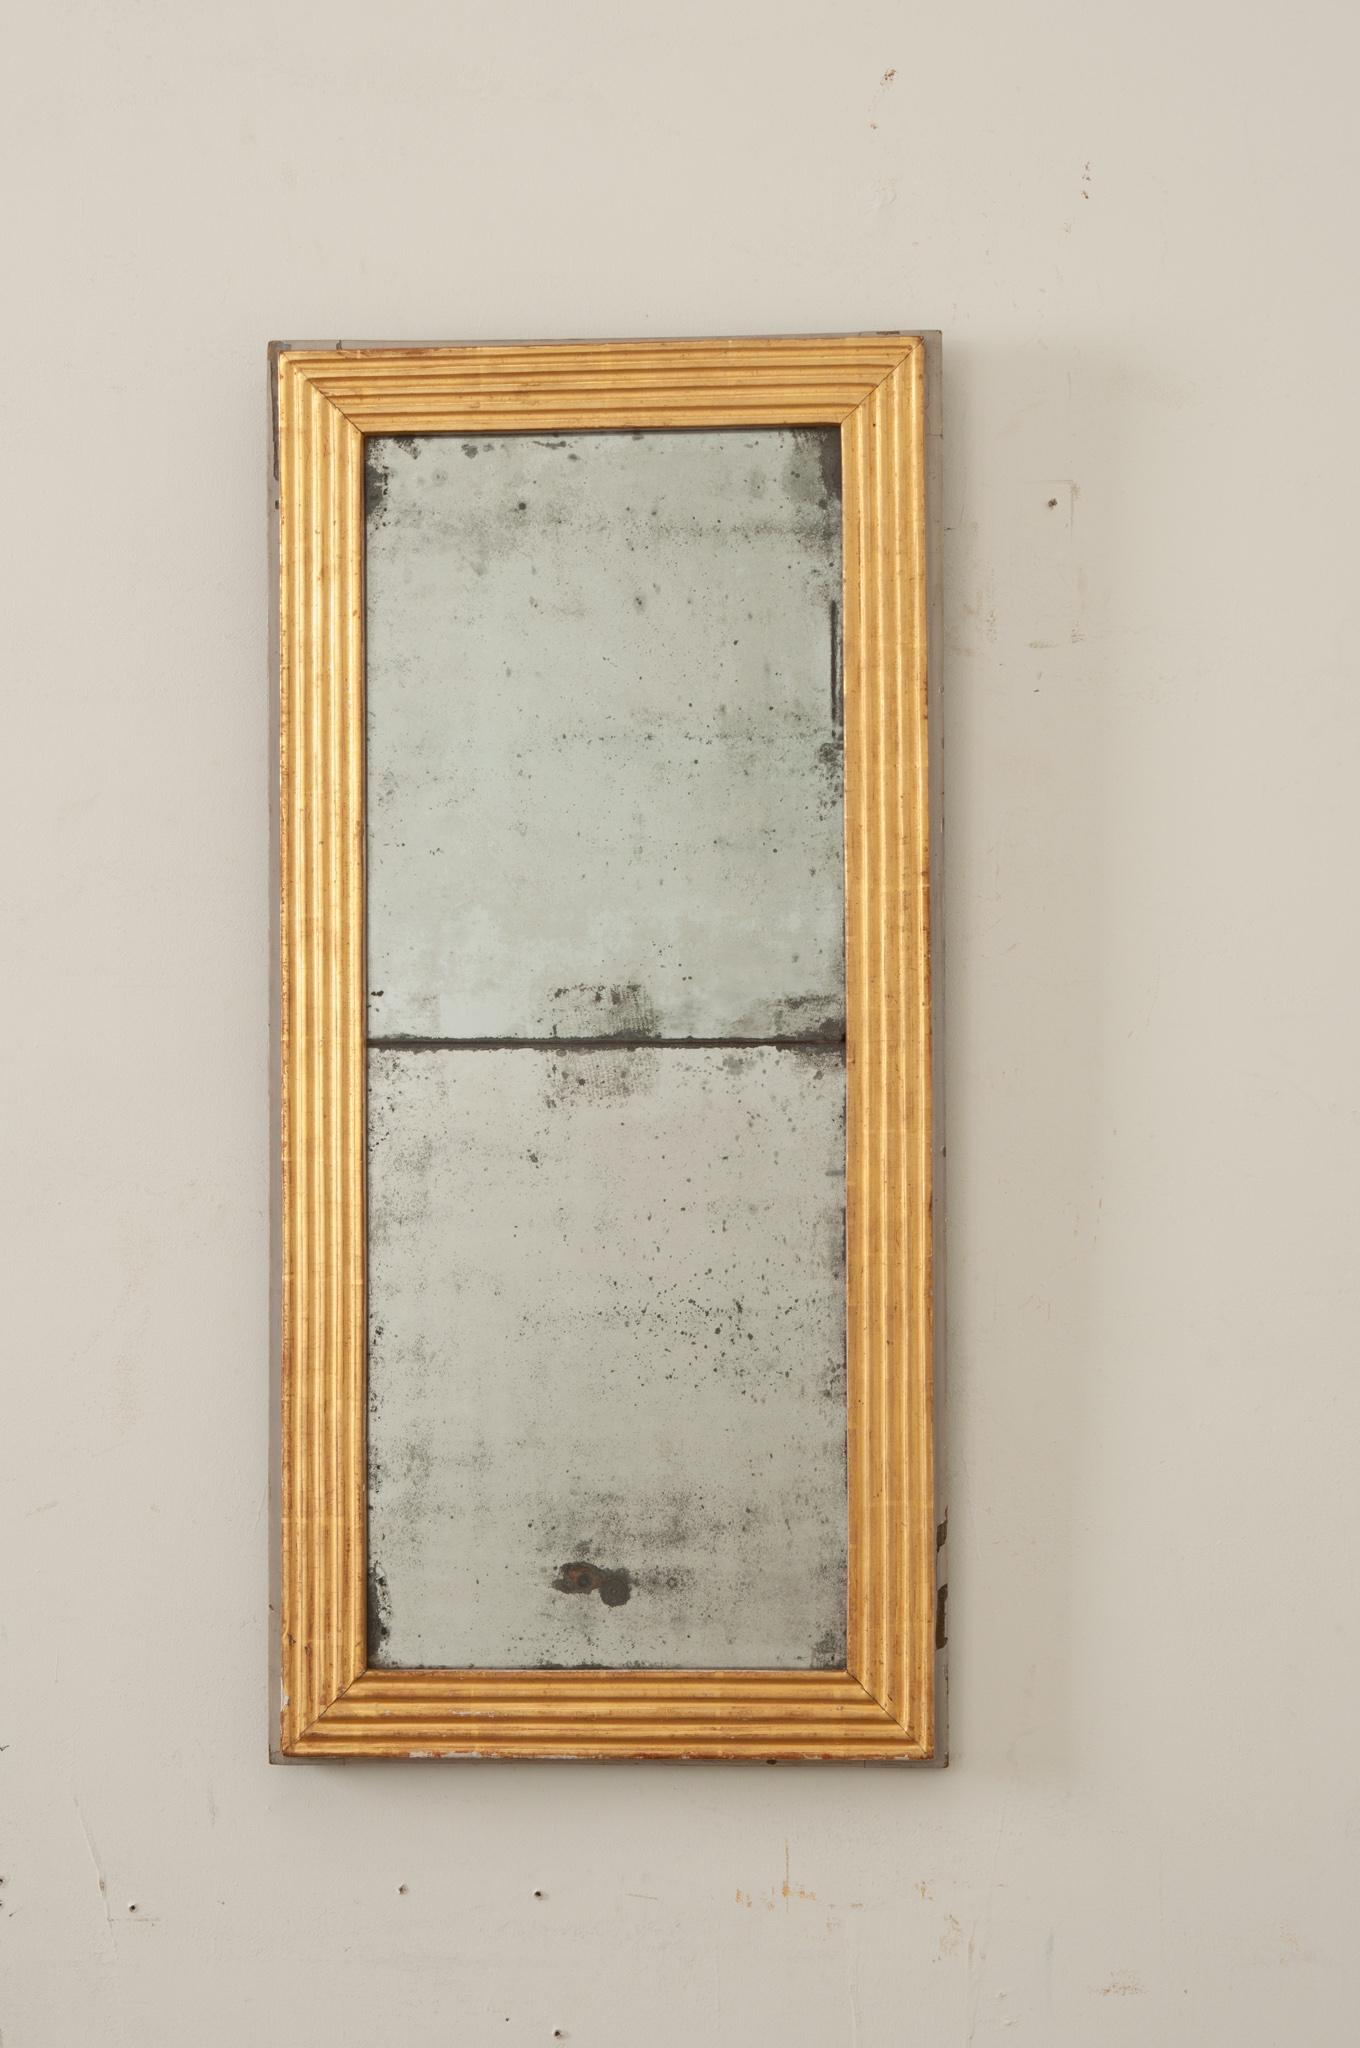 French 19th Century gold gilt mirror with its original glass. The hand-carved wood frame is painted a lustrous gold gilt and is edged in a linear design that creates a beautiful, simple, timeless look.  This mirror is truly stunning, as the heavy